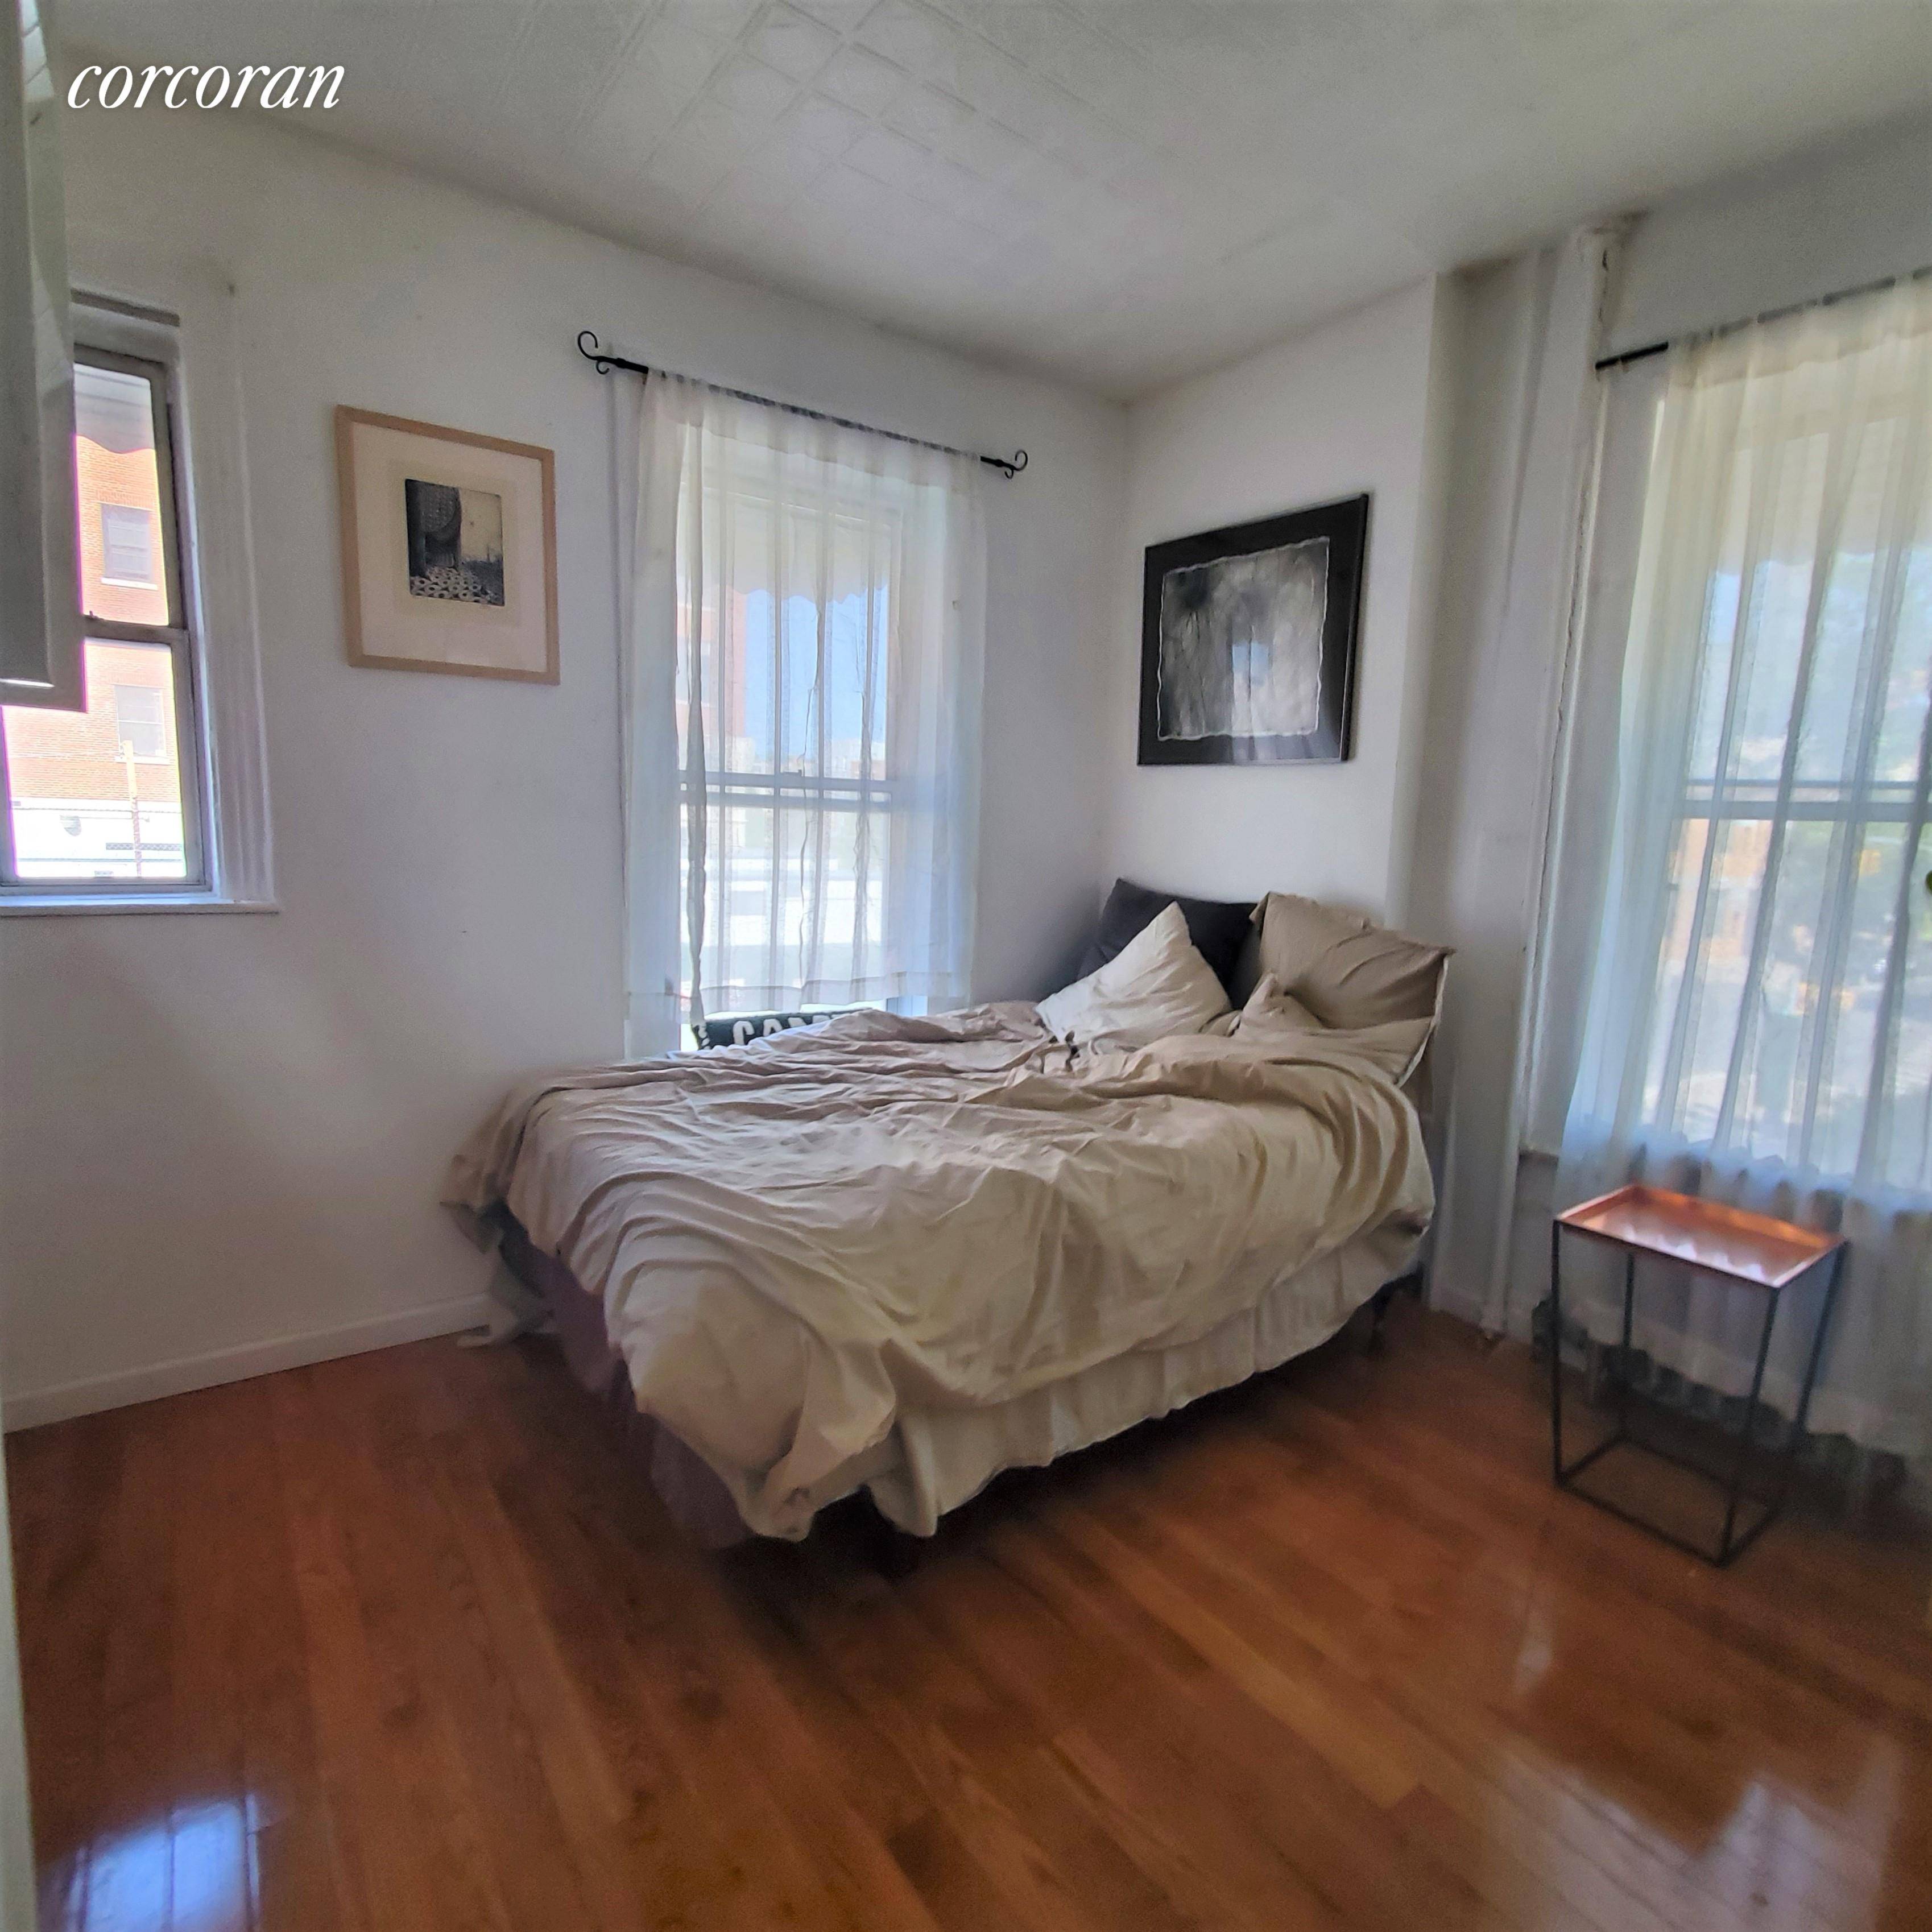 Sun Drenched Three bedroom Pad in the Heart of Willliamsburg North 4th Street Roebling !